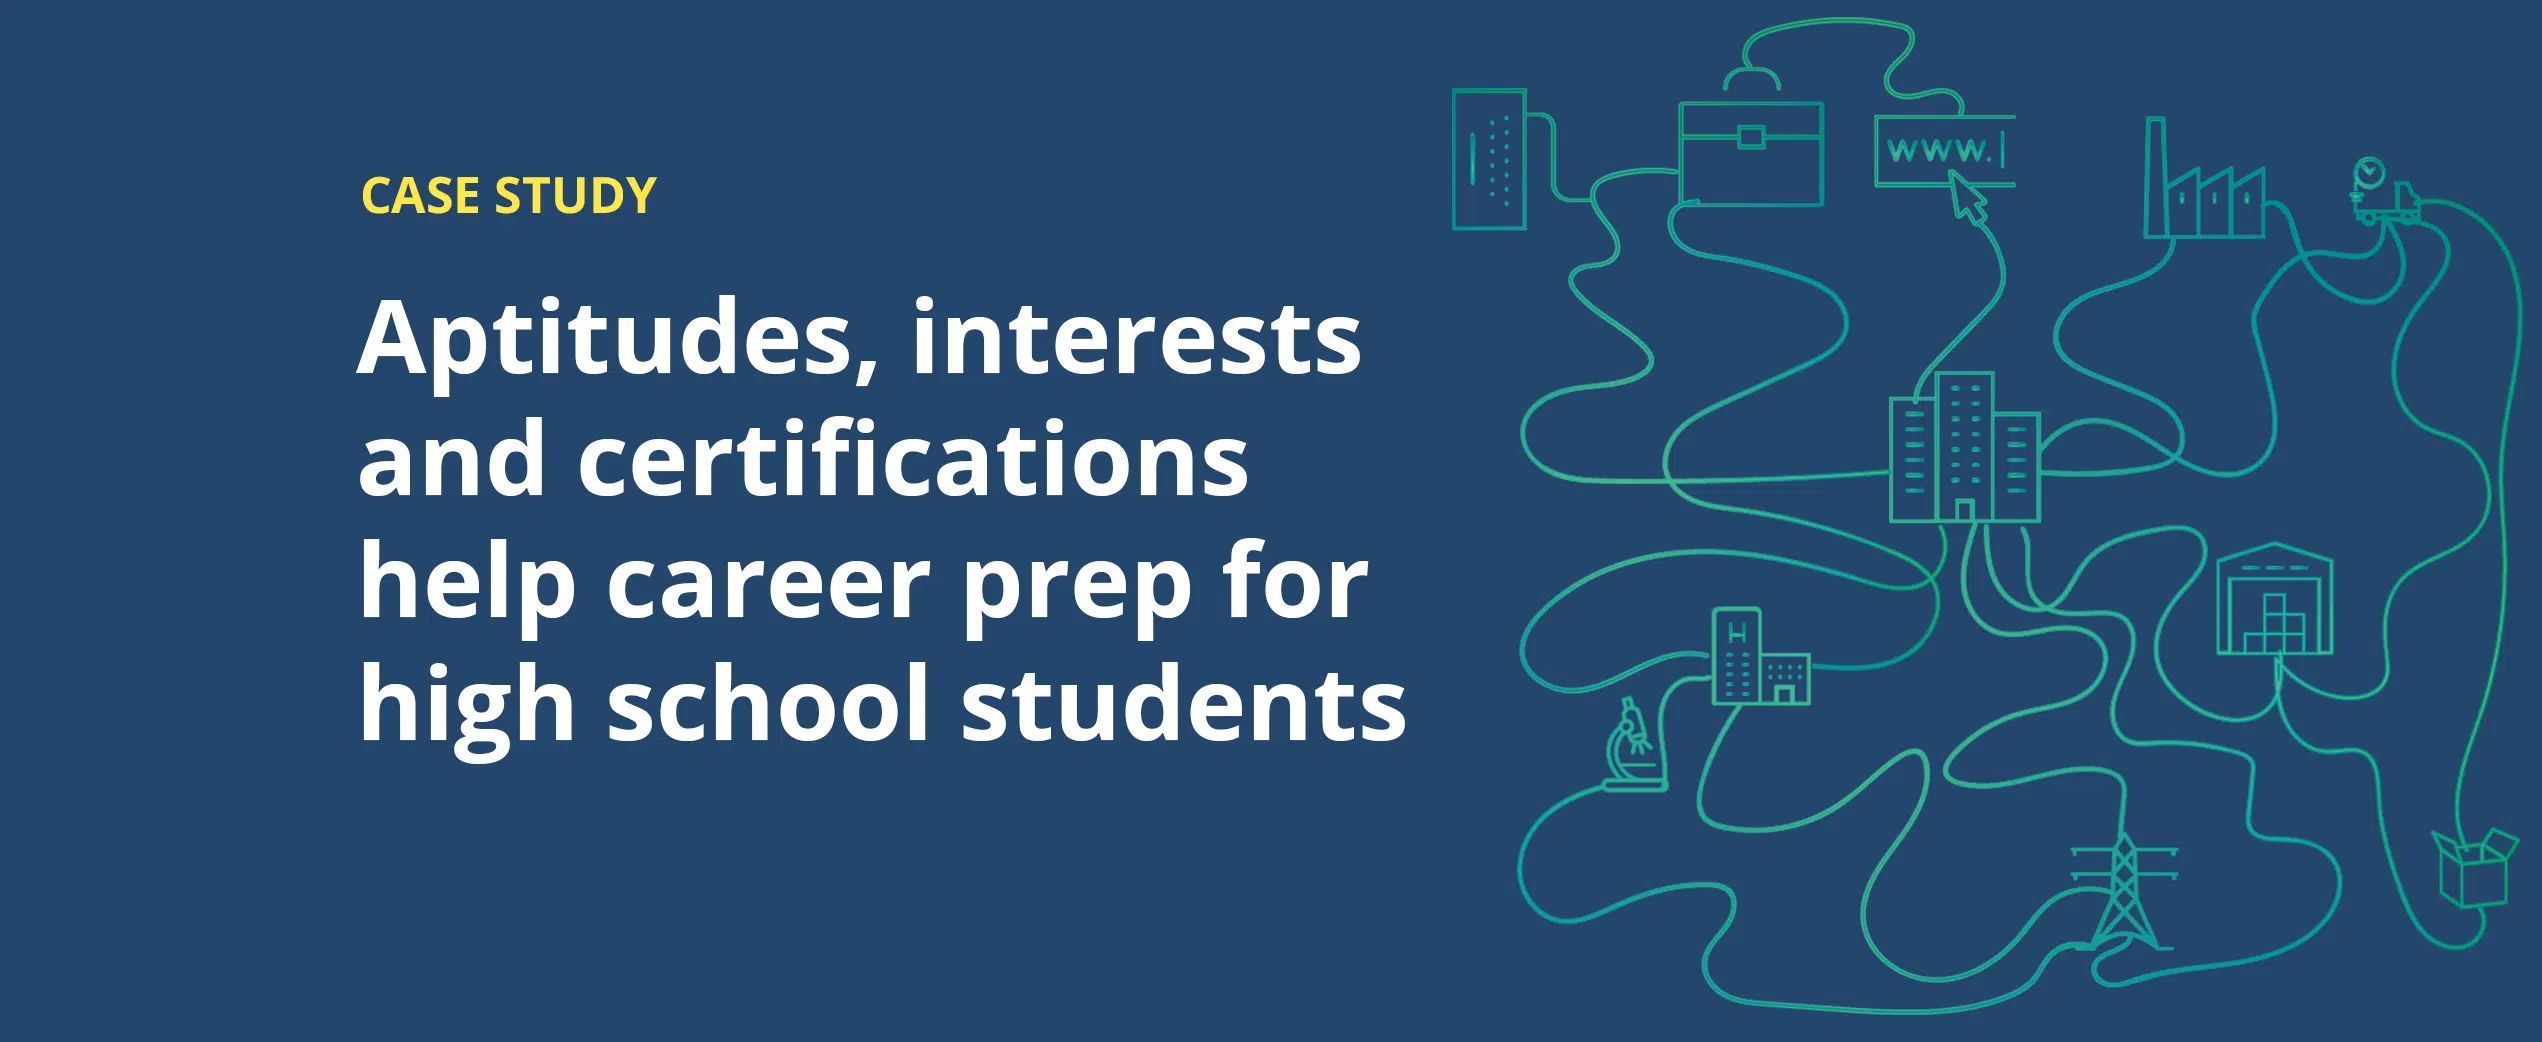 Case Study: Aptitudes, interests and certifications help career prep for high school students.